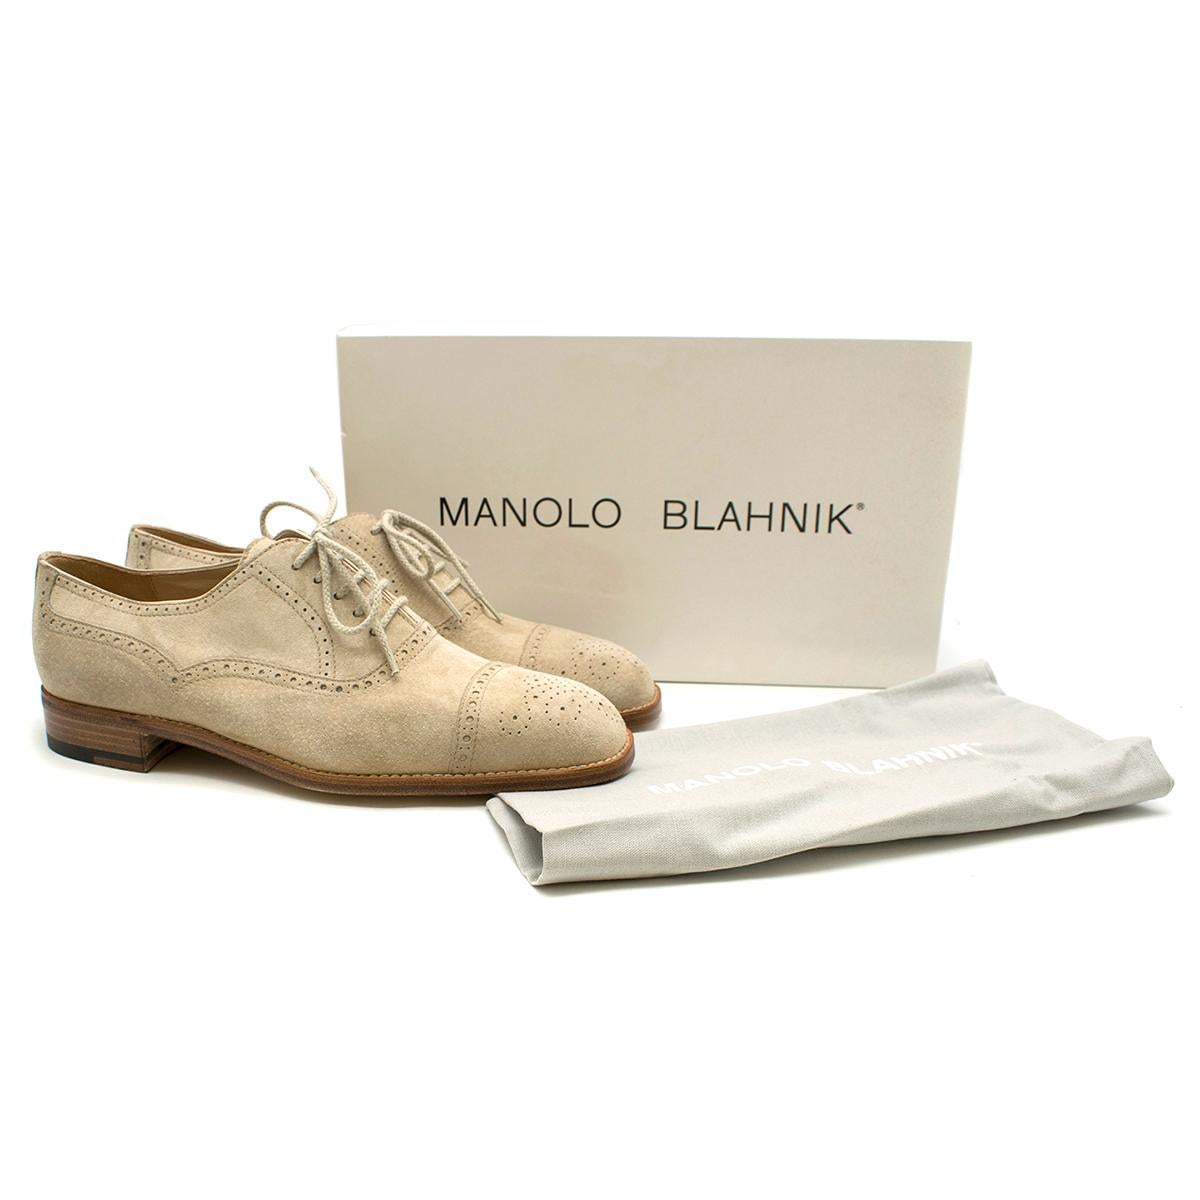 Manolo Blahnik Sand Suede Cap Toe Oxfords

- Sand Broque Oxfords 
- Toe cap front, lace ups 
- Low tops, leather lining 
- Hard brown soles 

This item comes with an additional dust bag and box. 

Please note, these items are pre-owned and may show